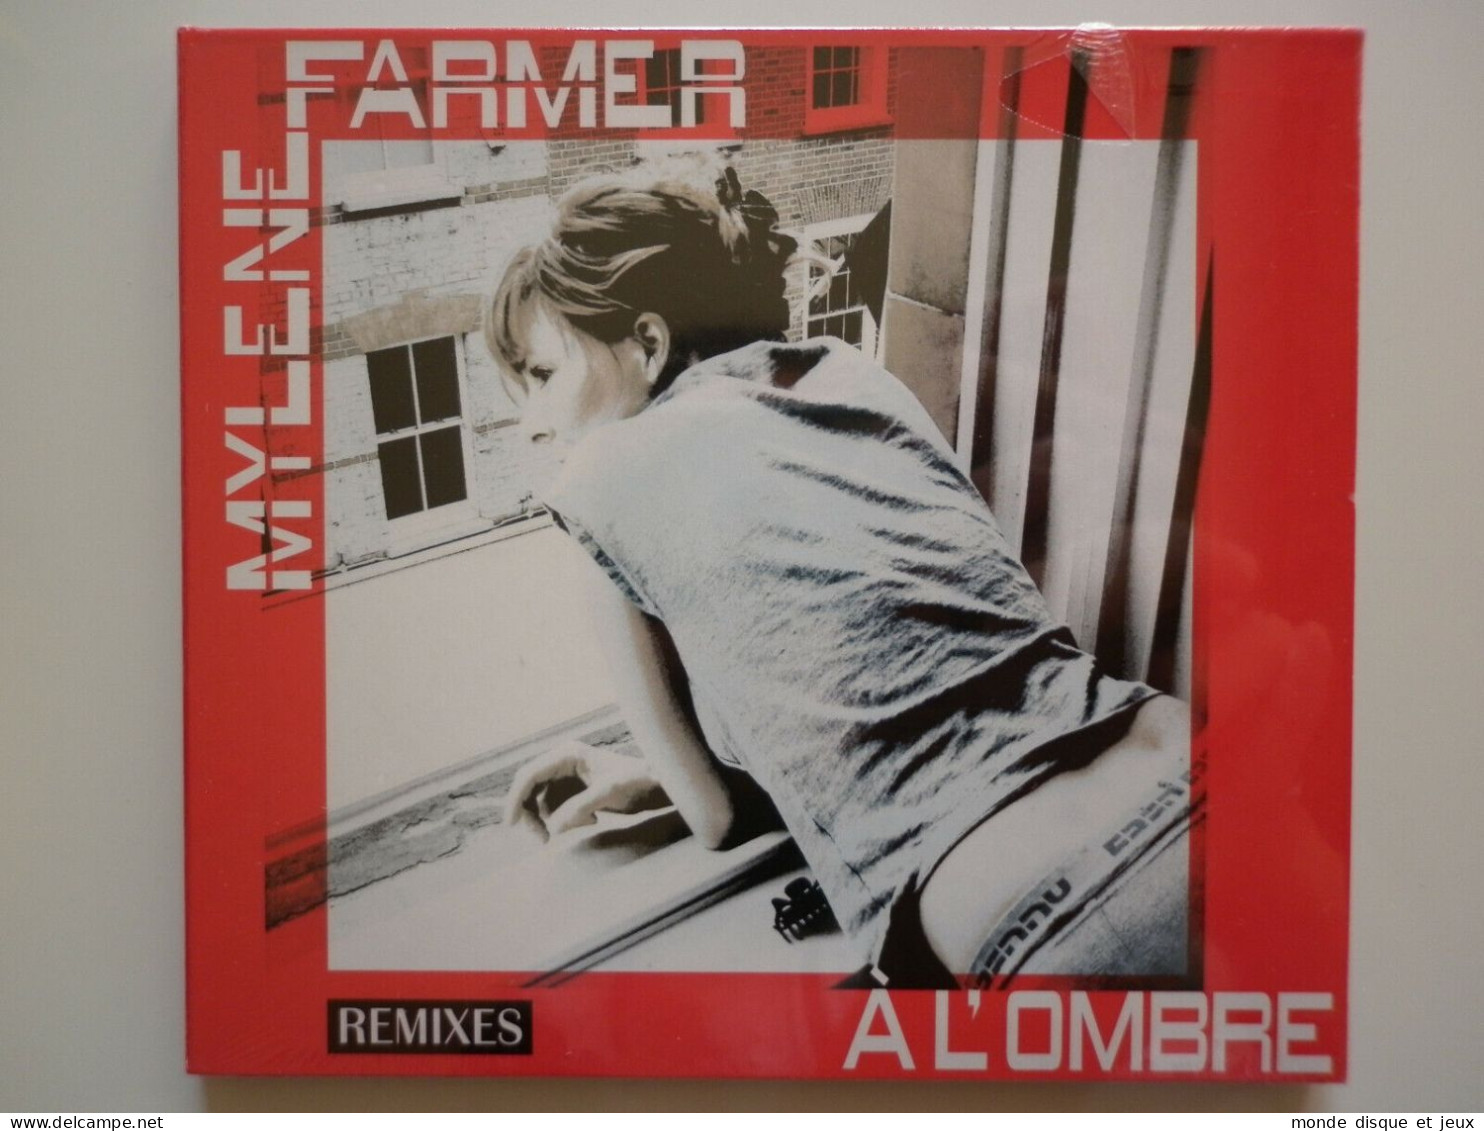 Mylene Farmer Cd Maxi A L'Ombre Version Rouge - Other - French Music